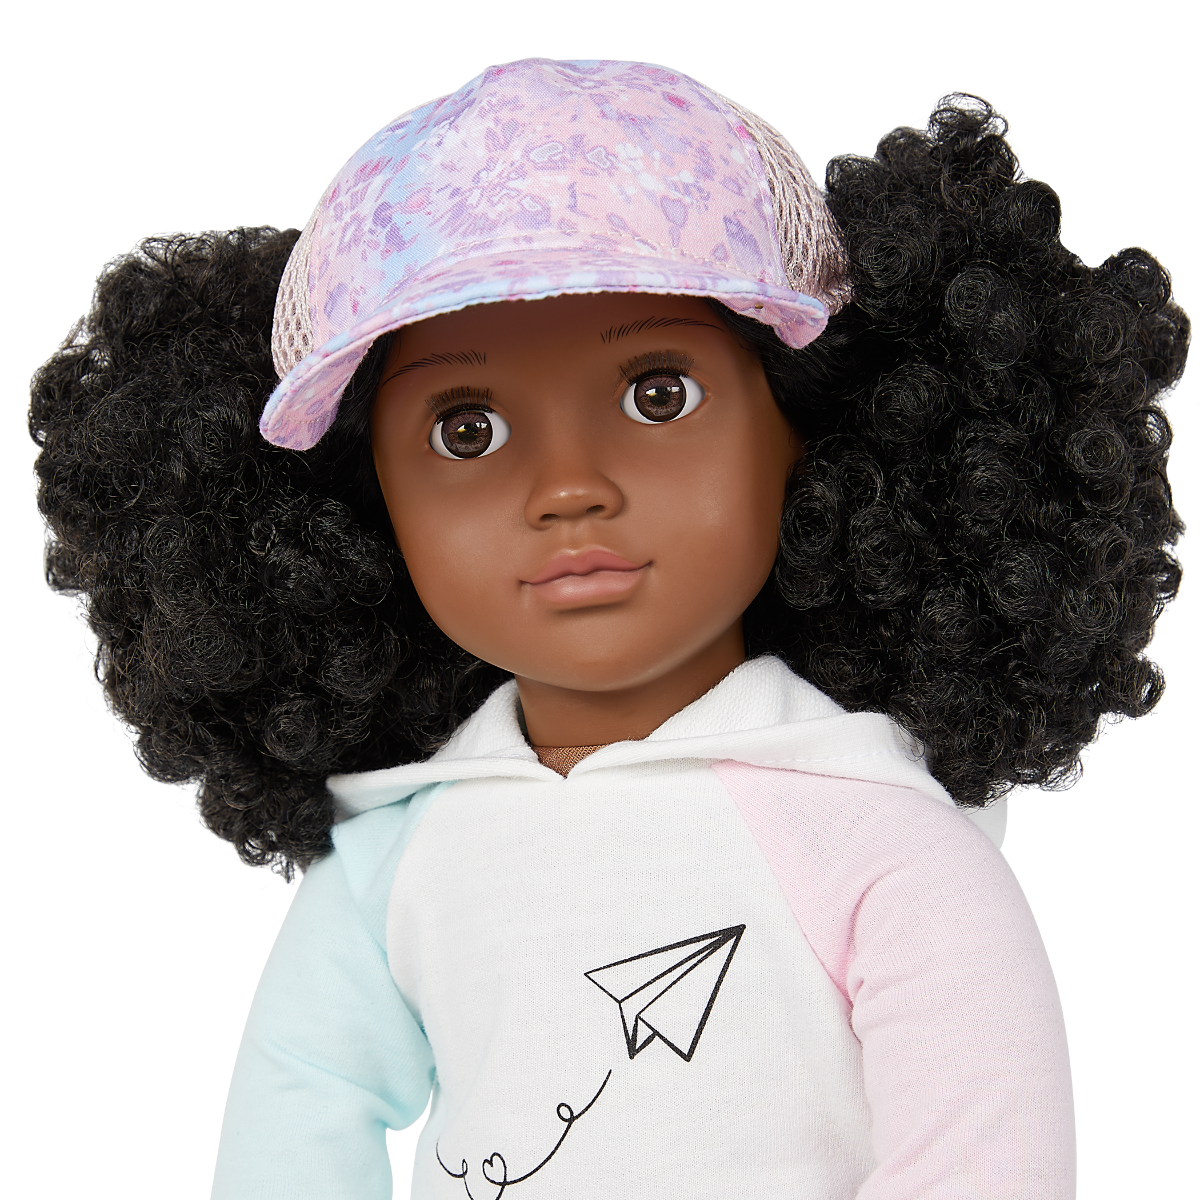 Our Generation 18-inch Travel Doll Tyanna